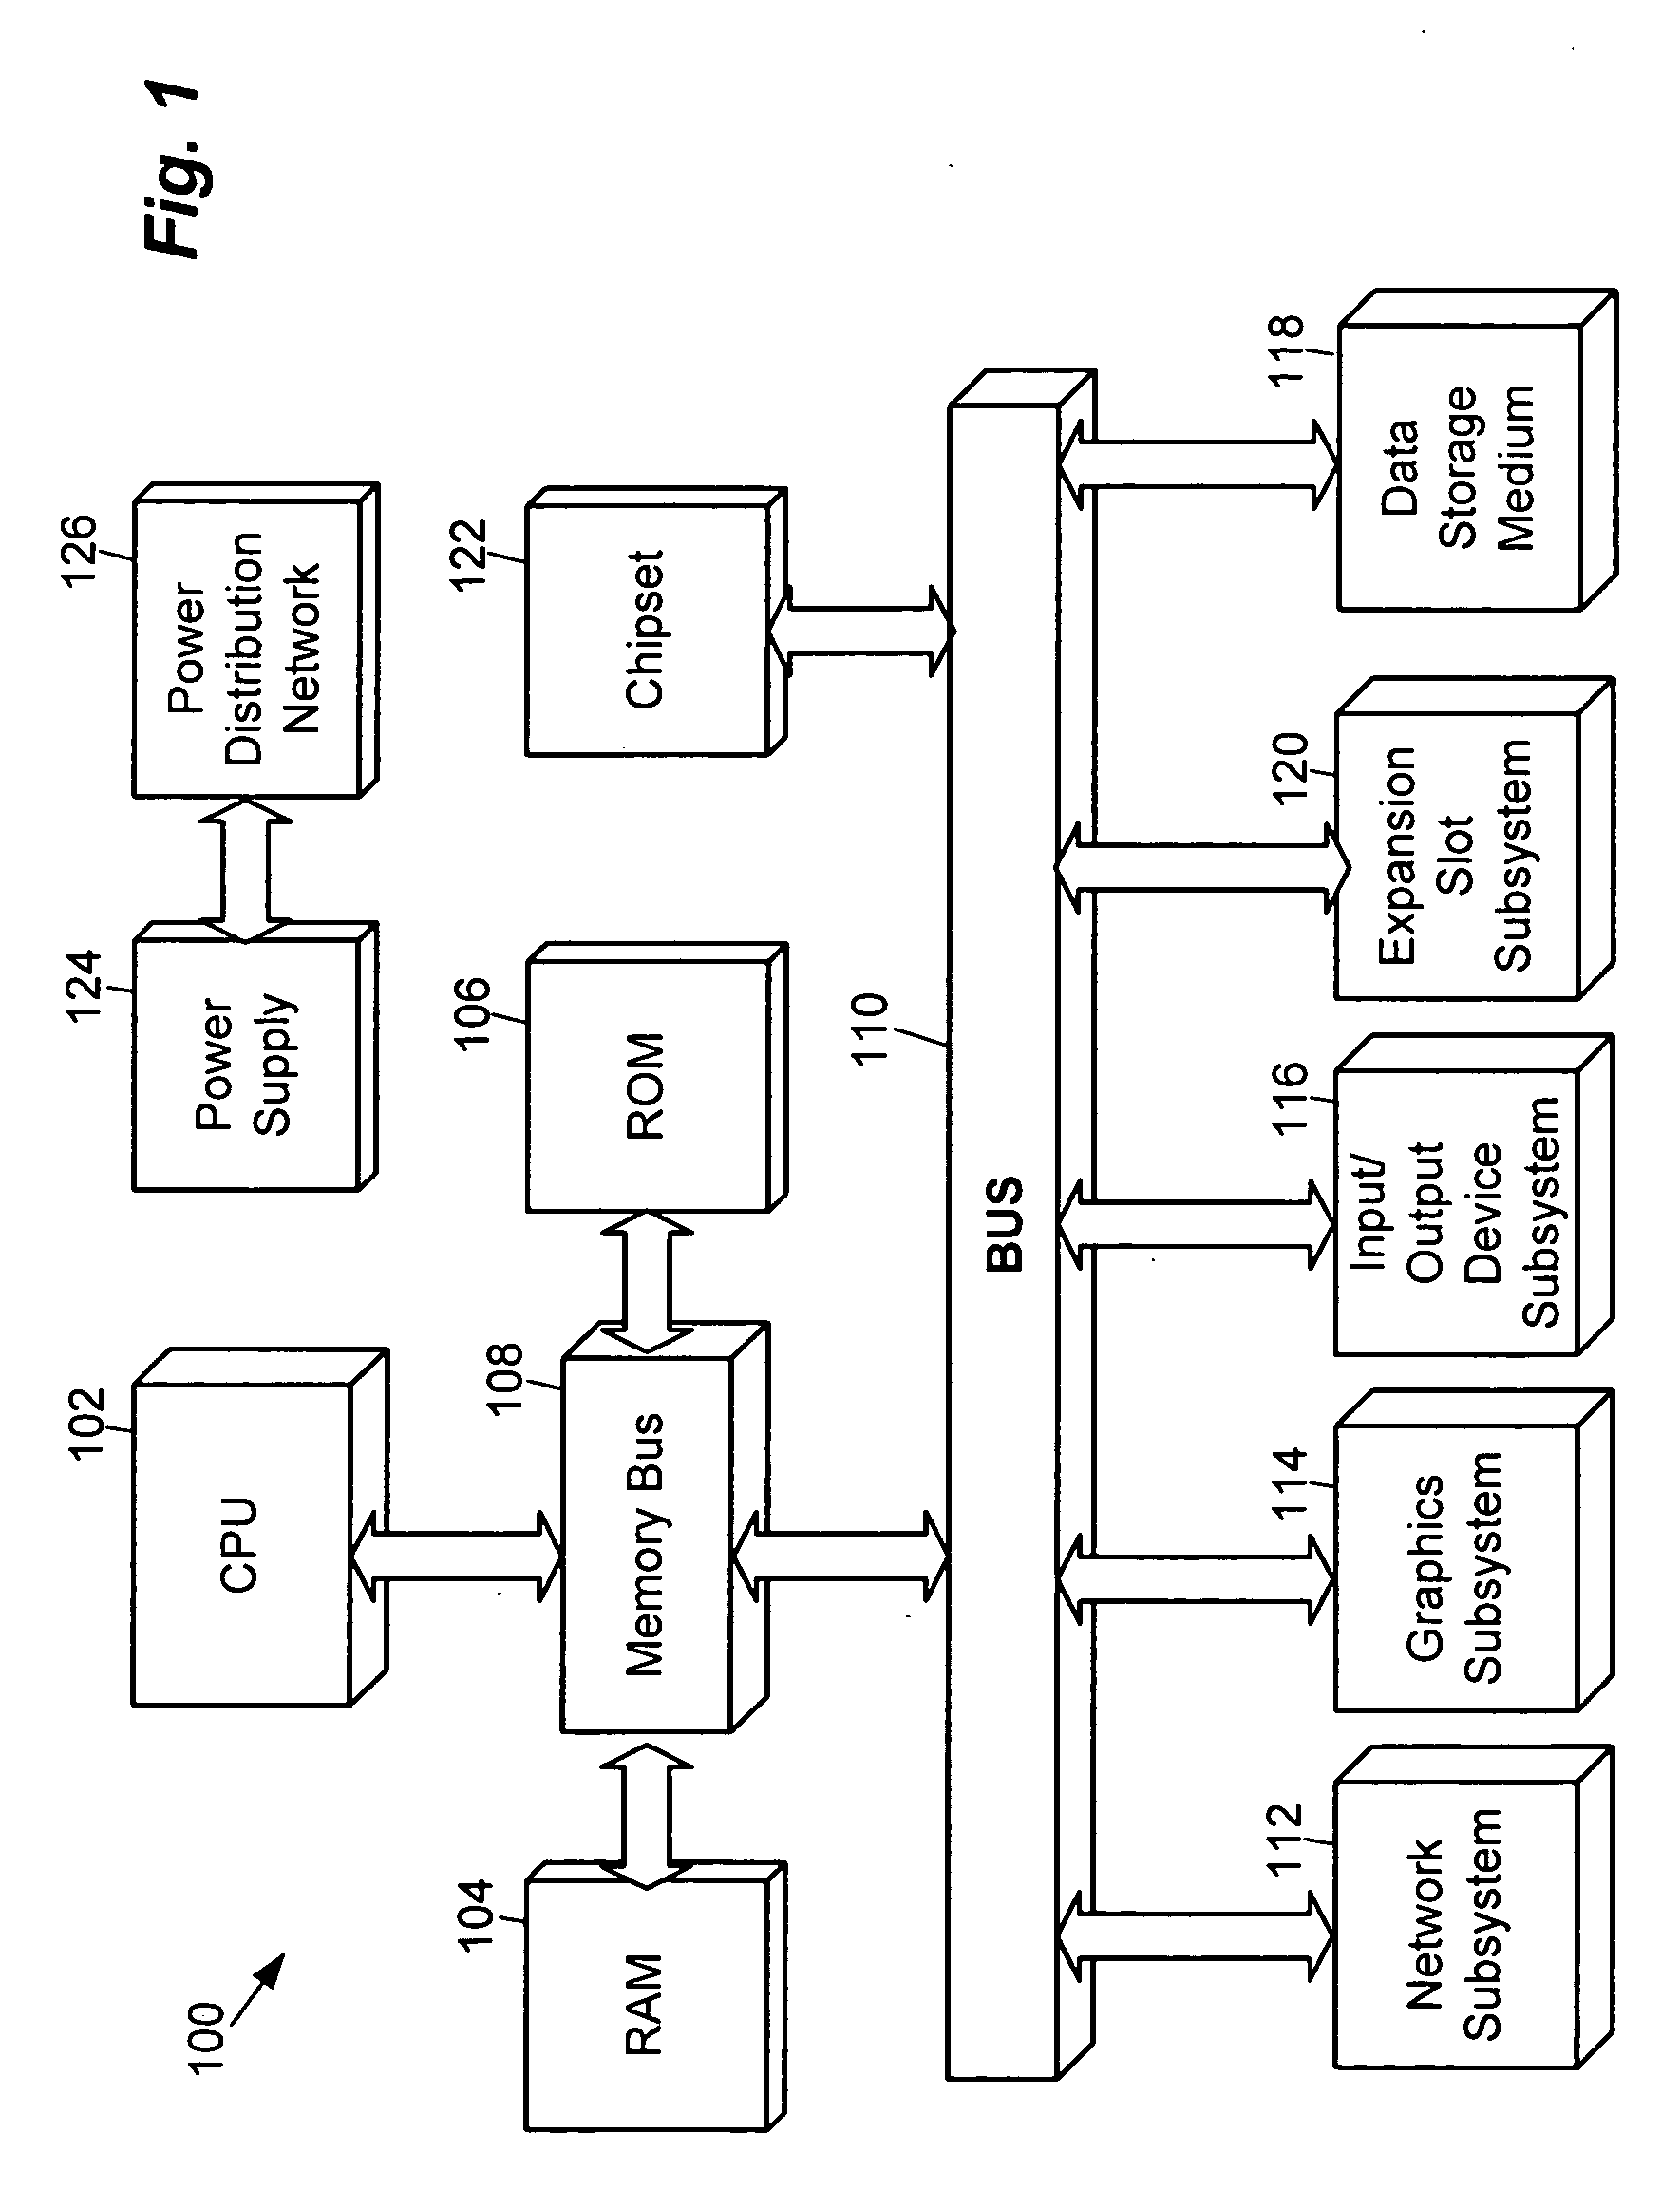 Method and apparatus for profiling power performance of software applications